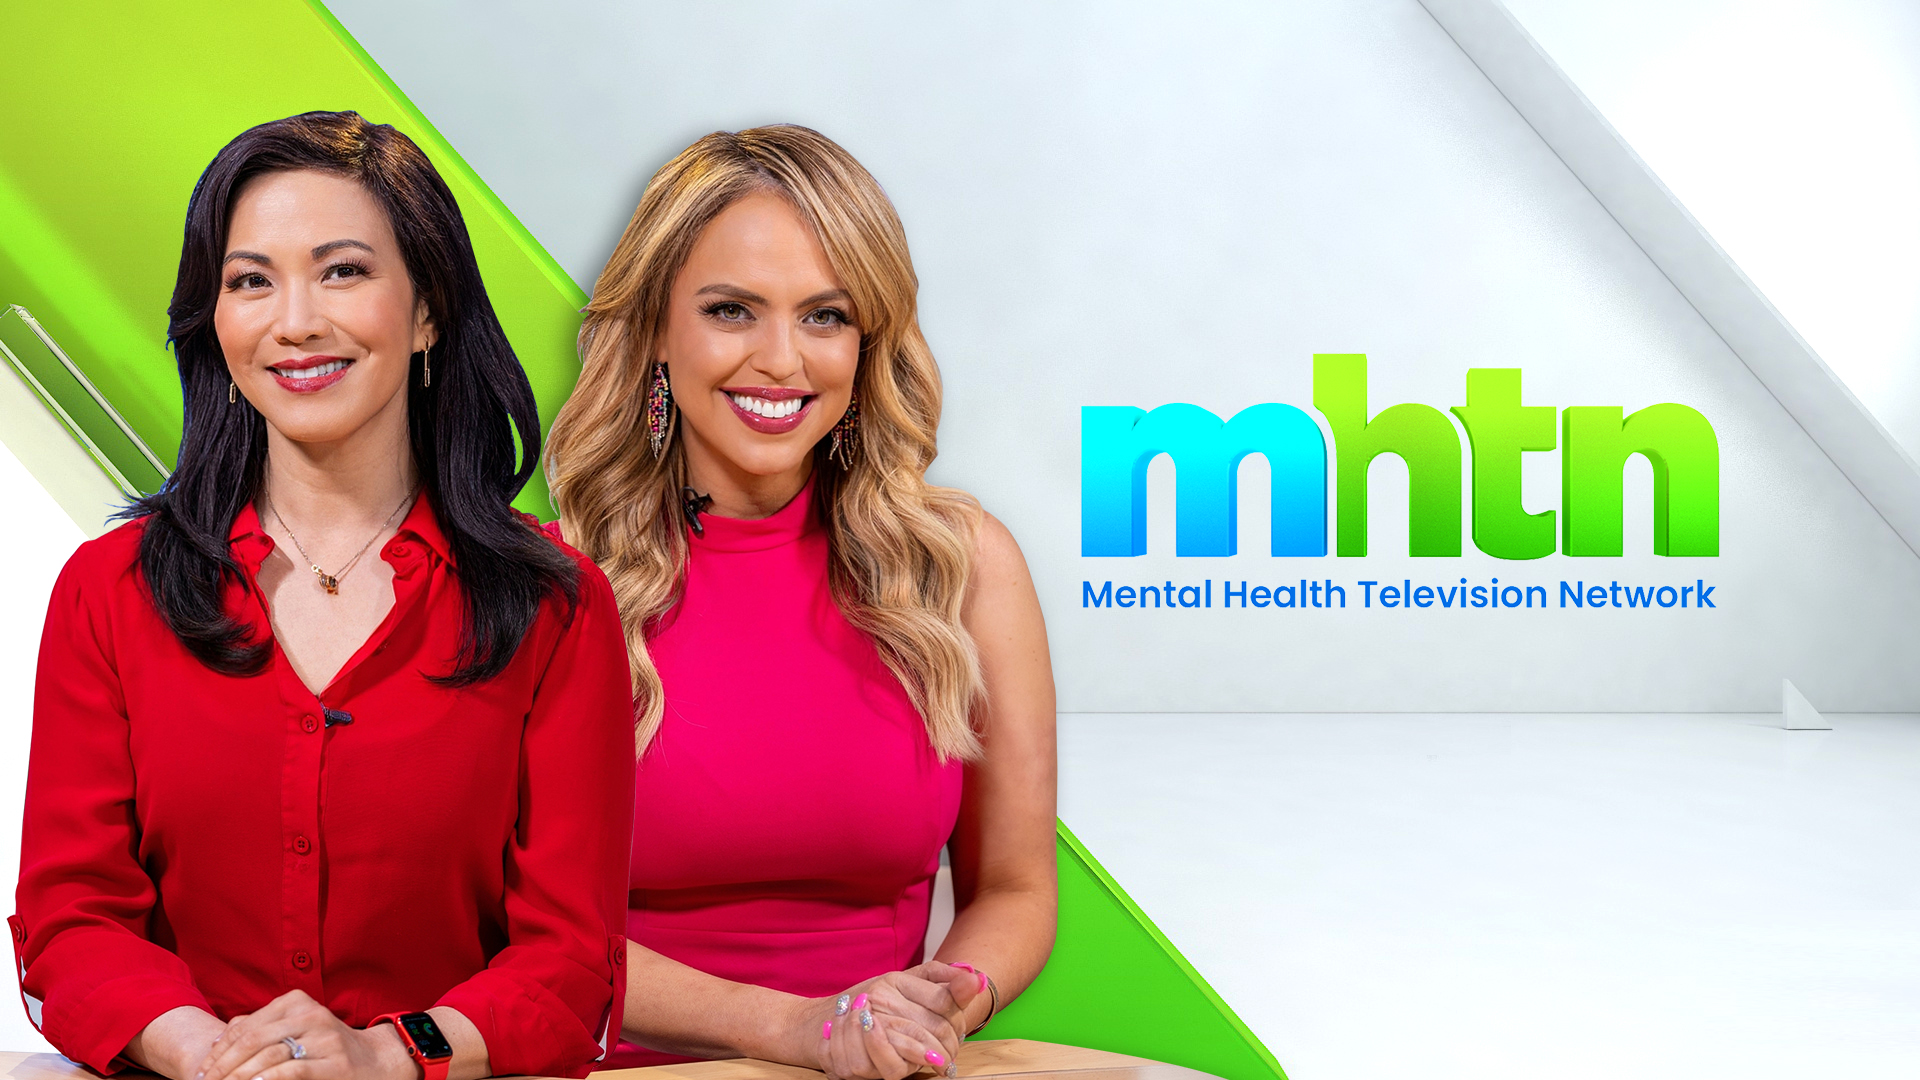 Mental Health Television Network (MHTN) Expands Reach with Launch on Netgem in UK and Ireland